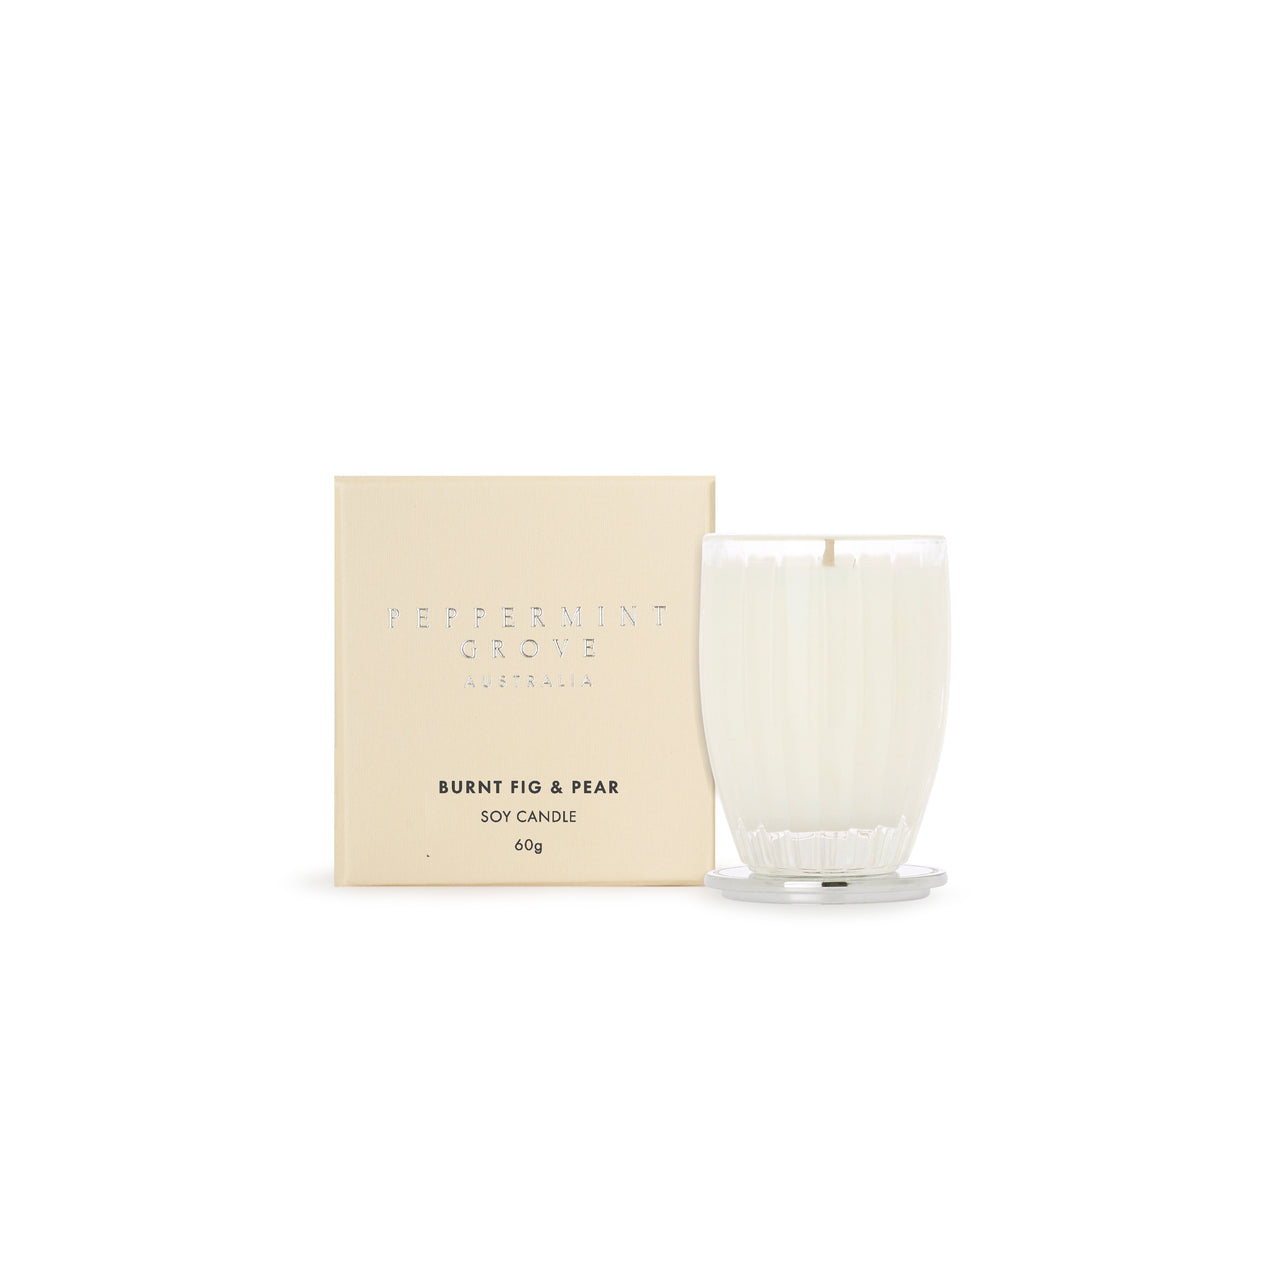 Burnt Fig & Pear Soy Candle